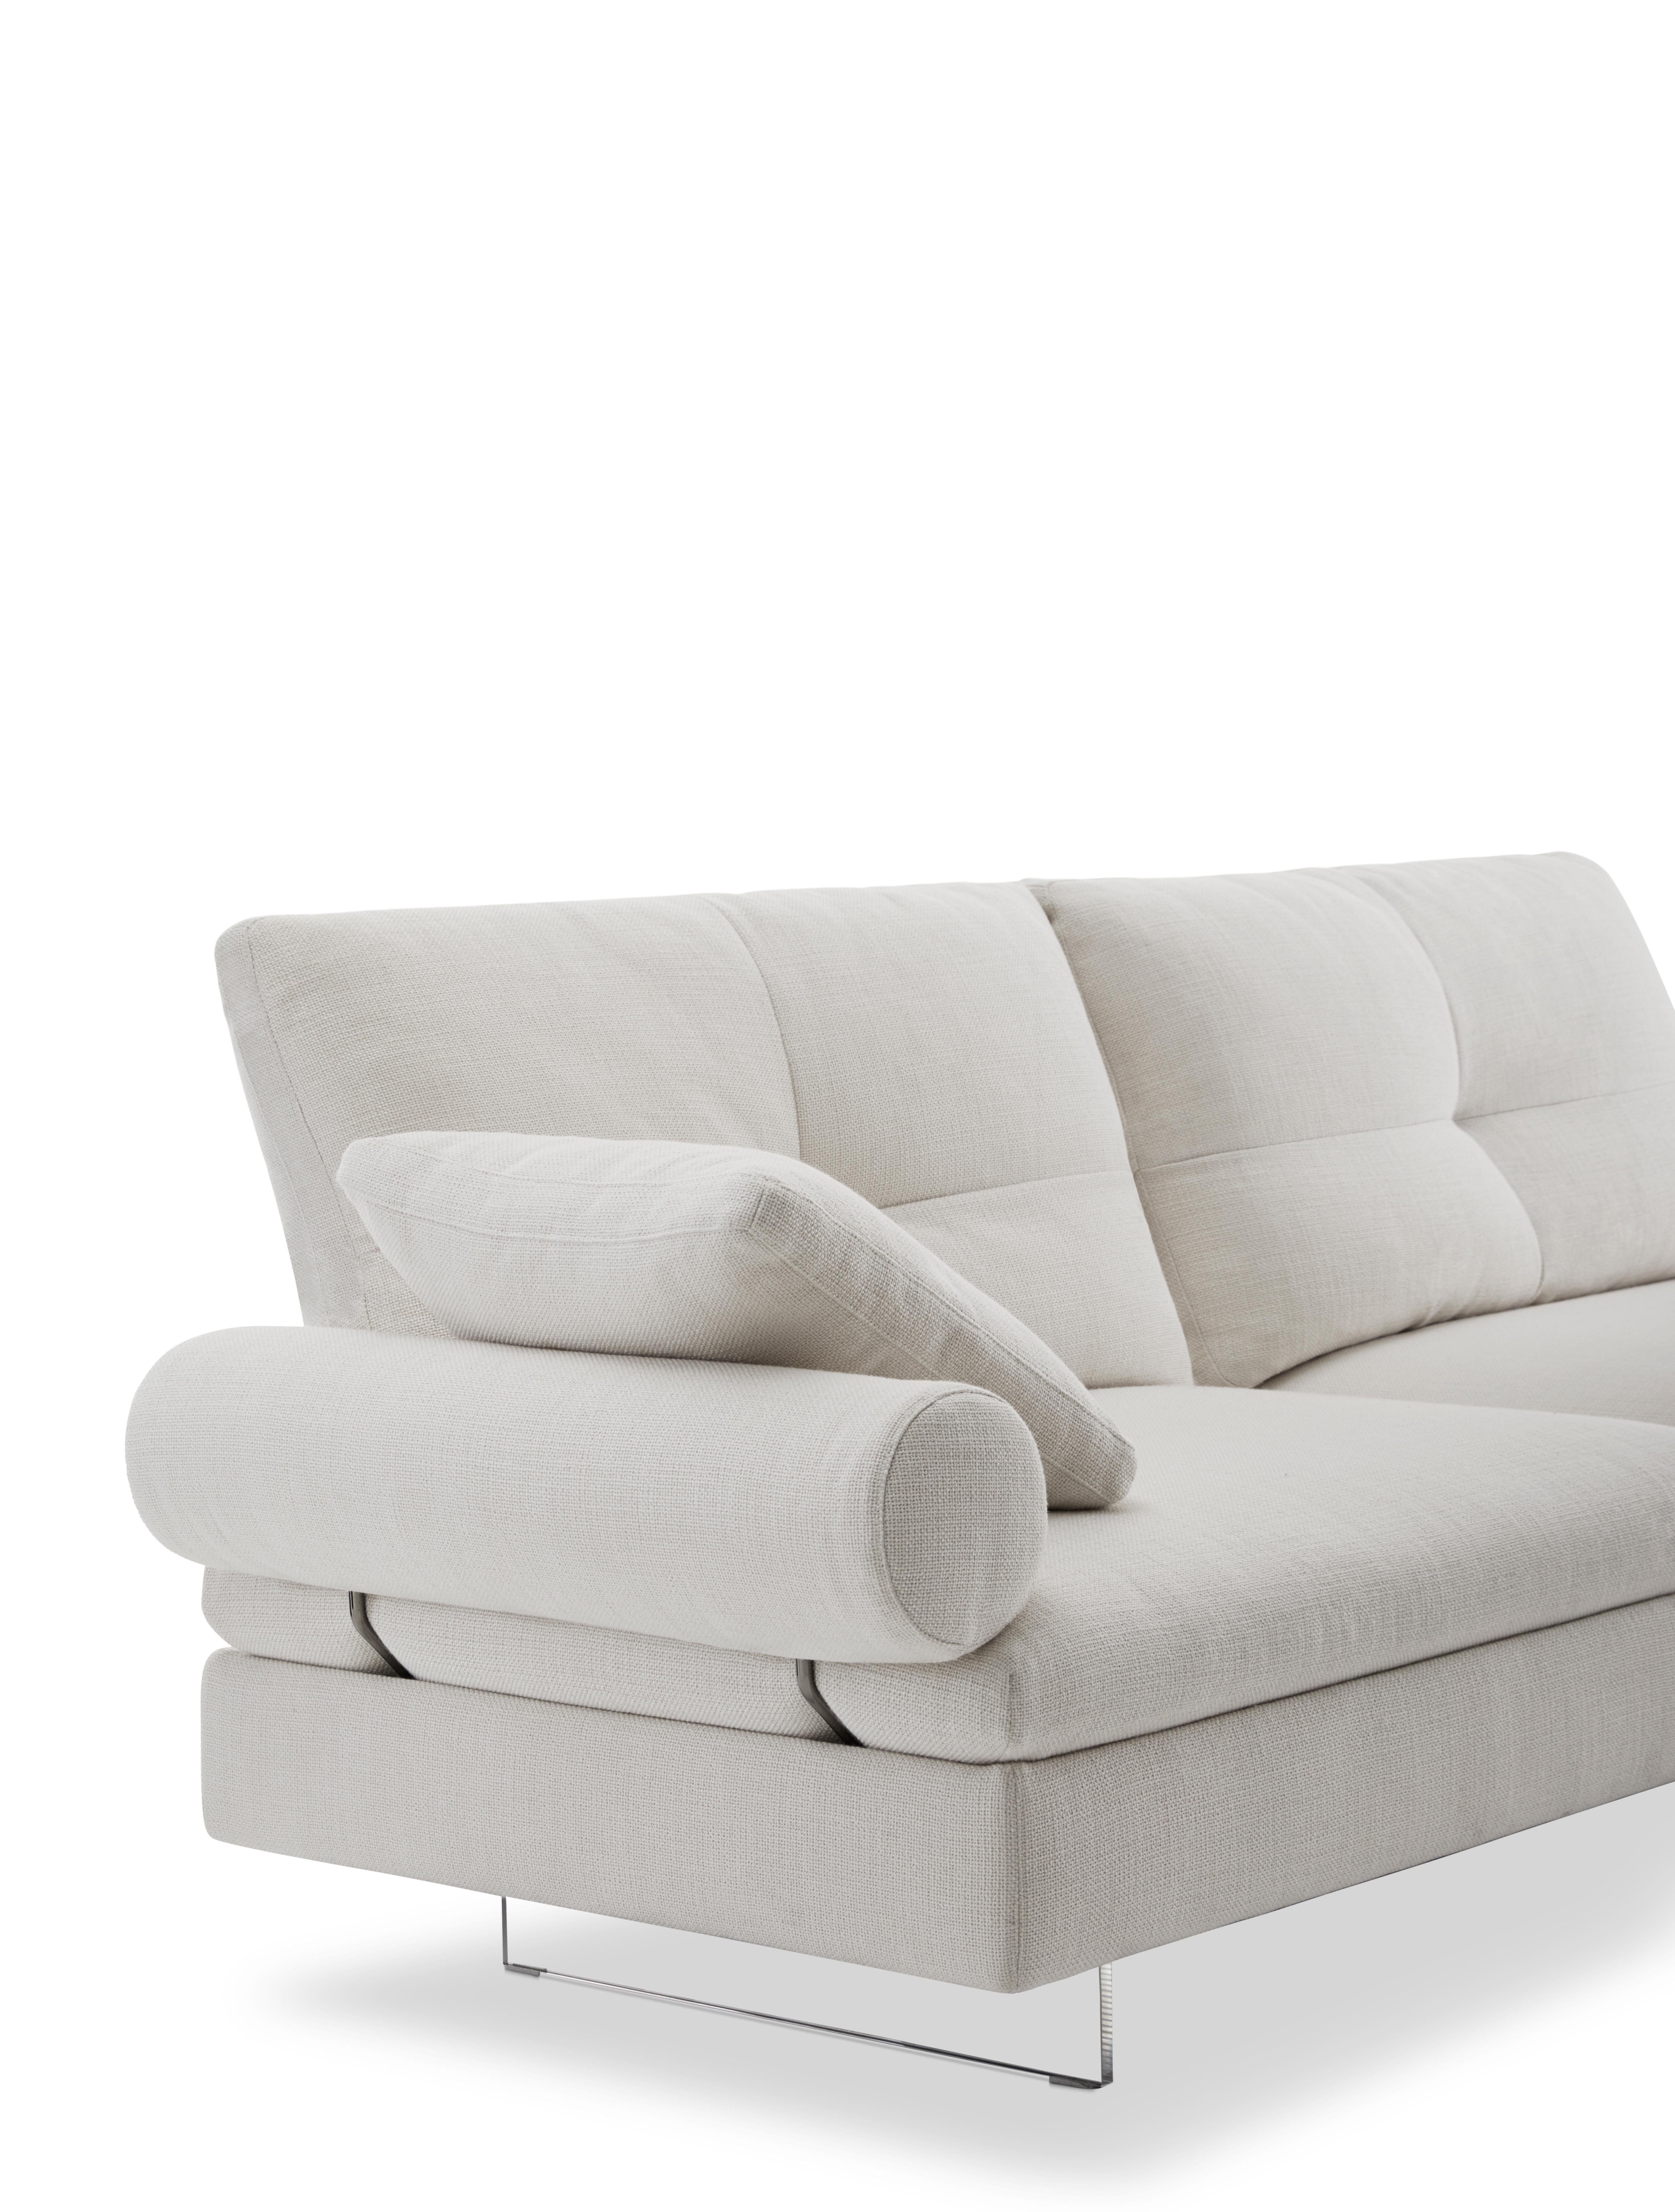 Modern Limes New 80 Small Sofa in Beige Upholstery with Roll Armrest by Sergio Bicego For Sale